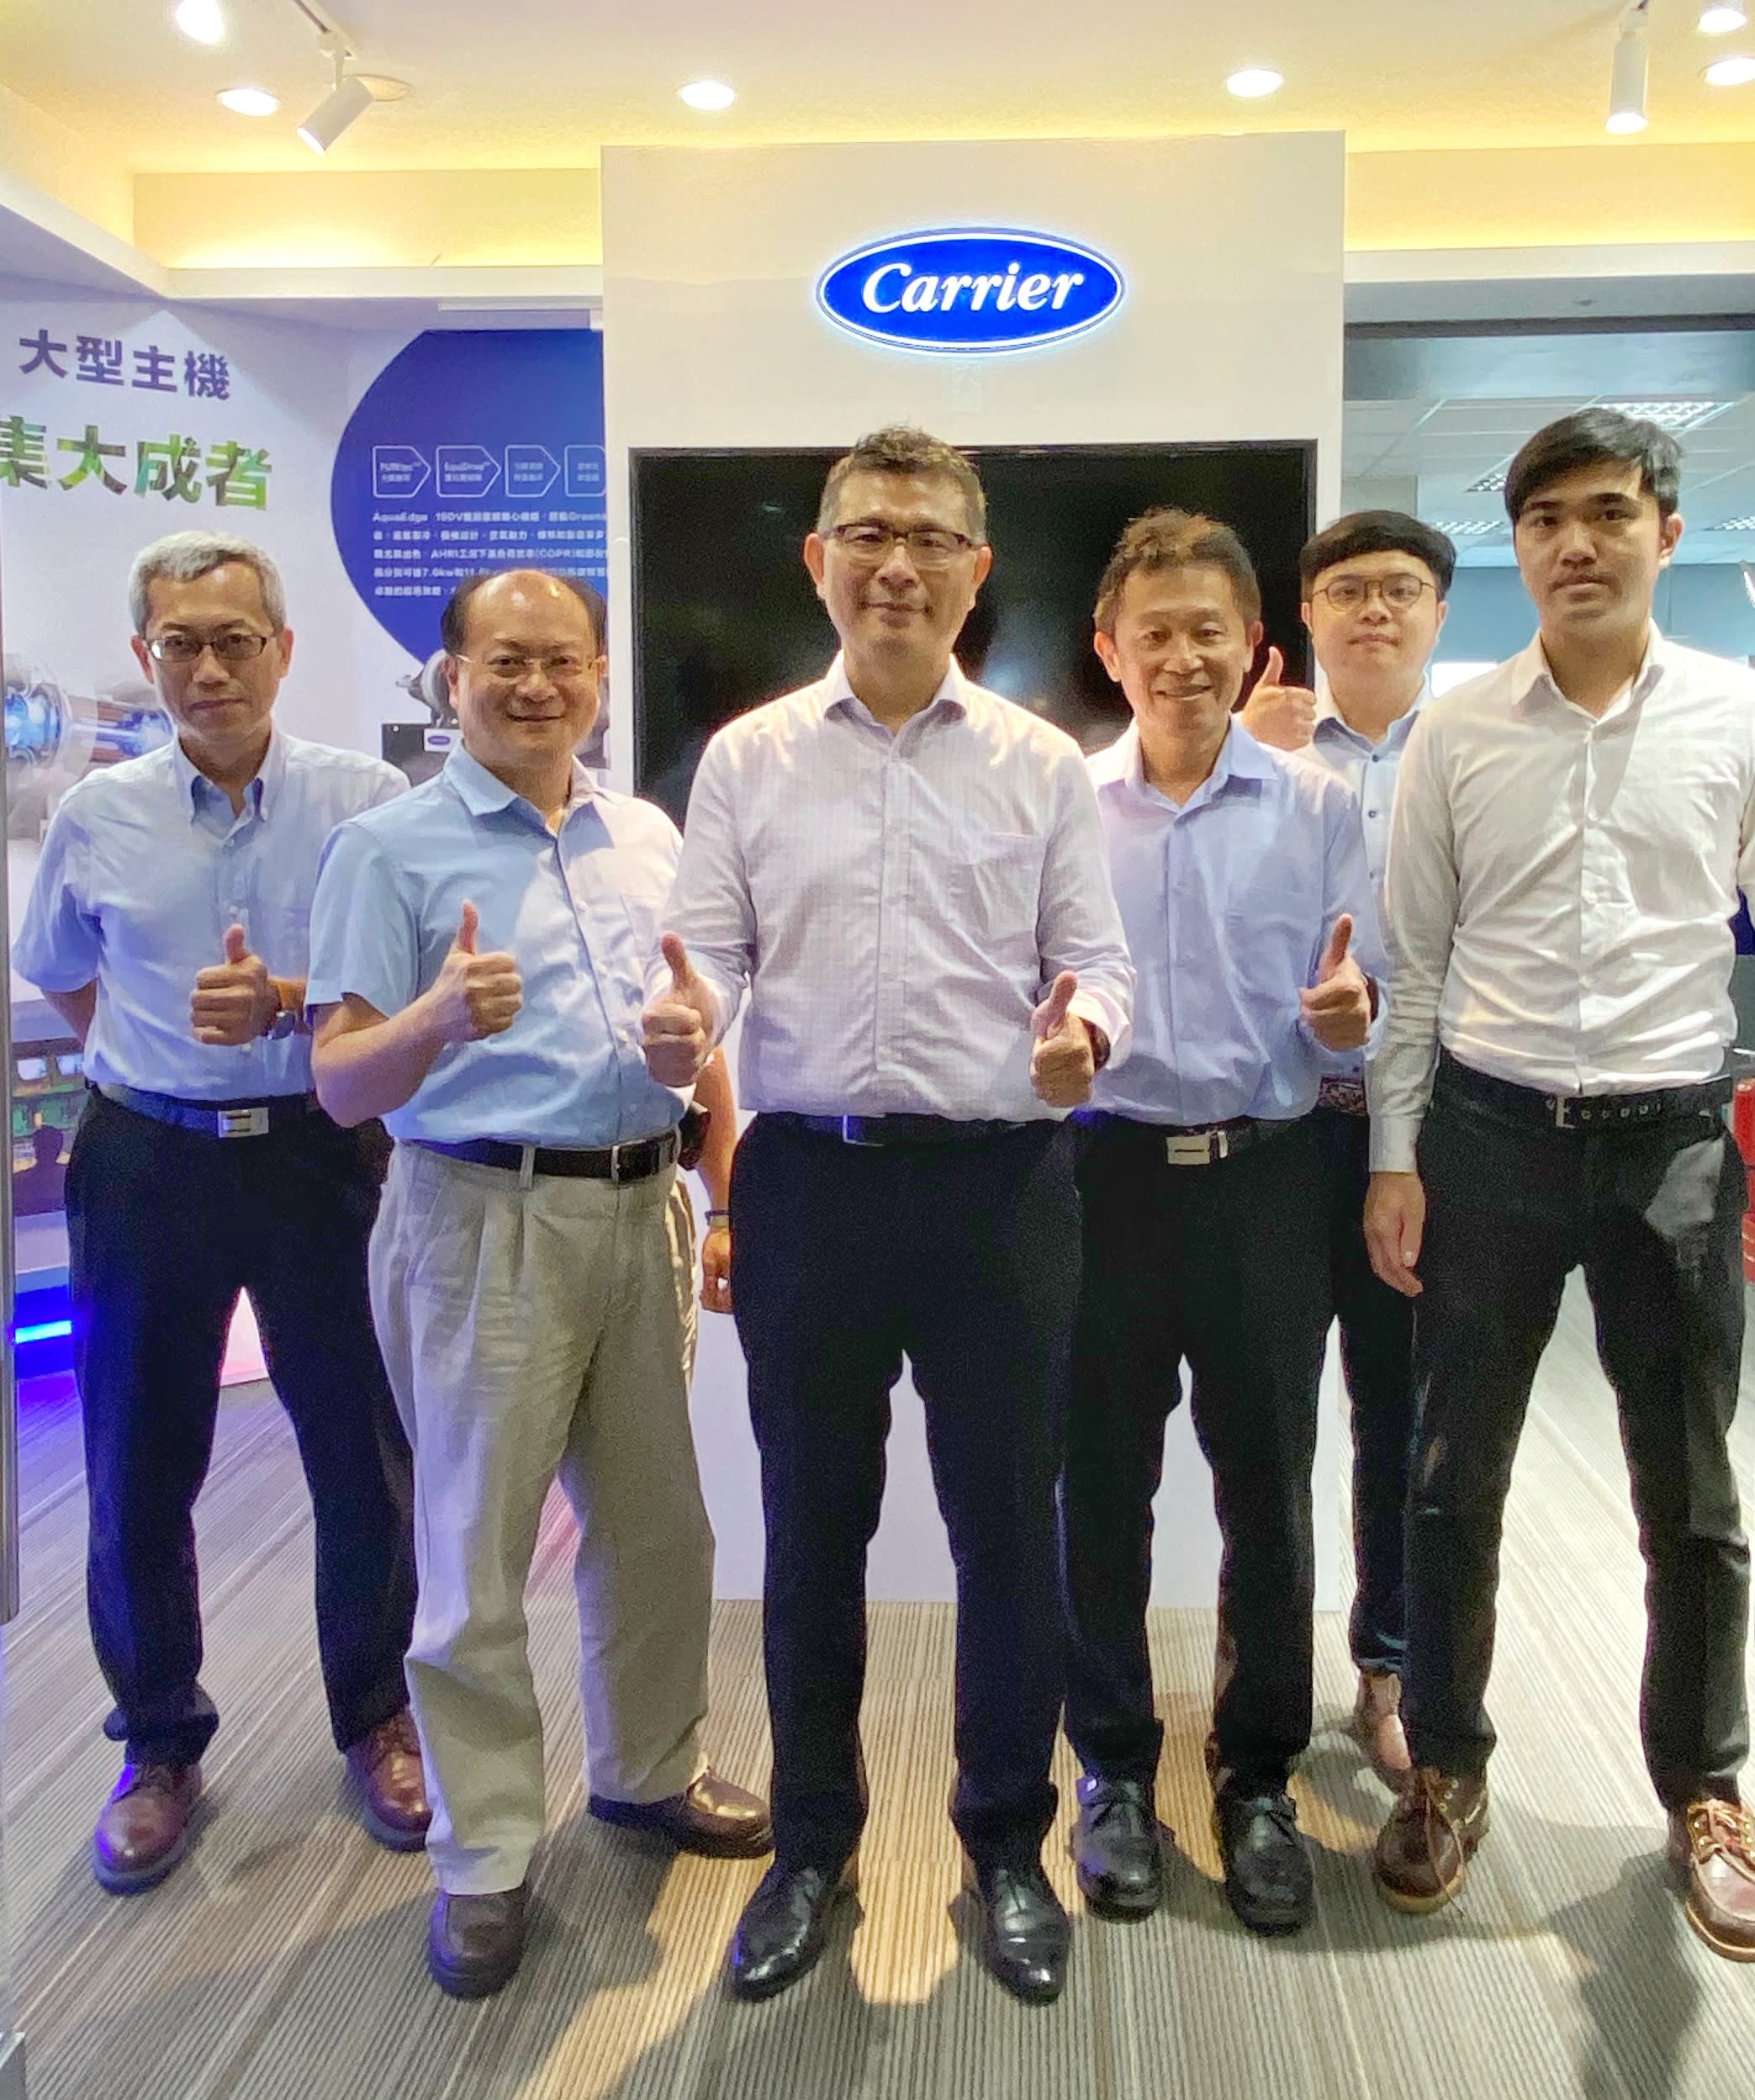 John Lu, General Manager, Steven Chen, Manager and Commercial Dept. team members